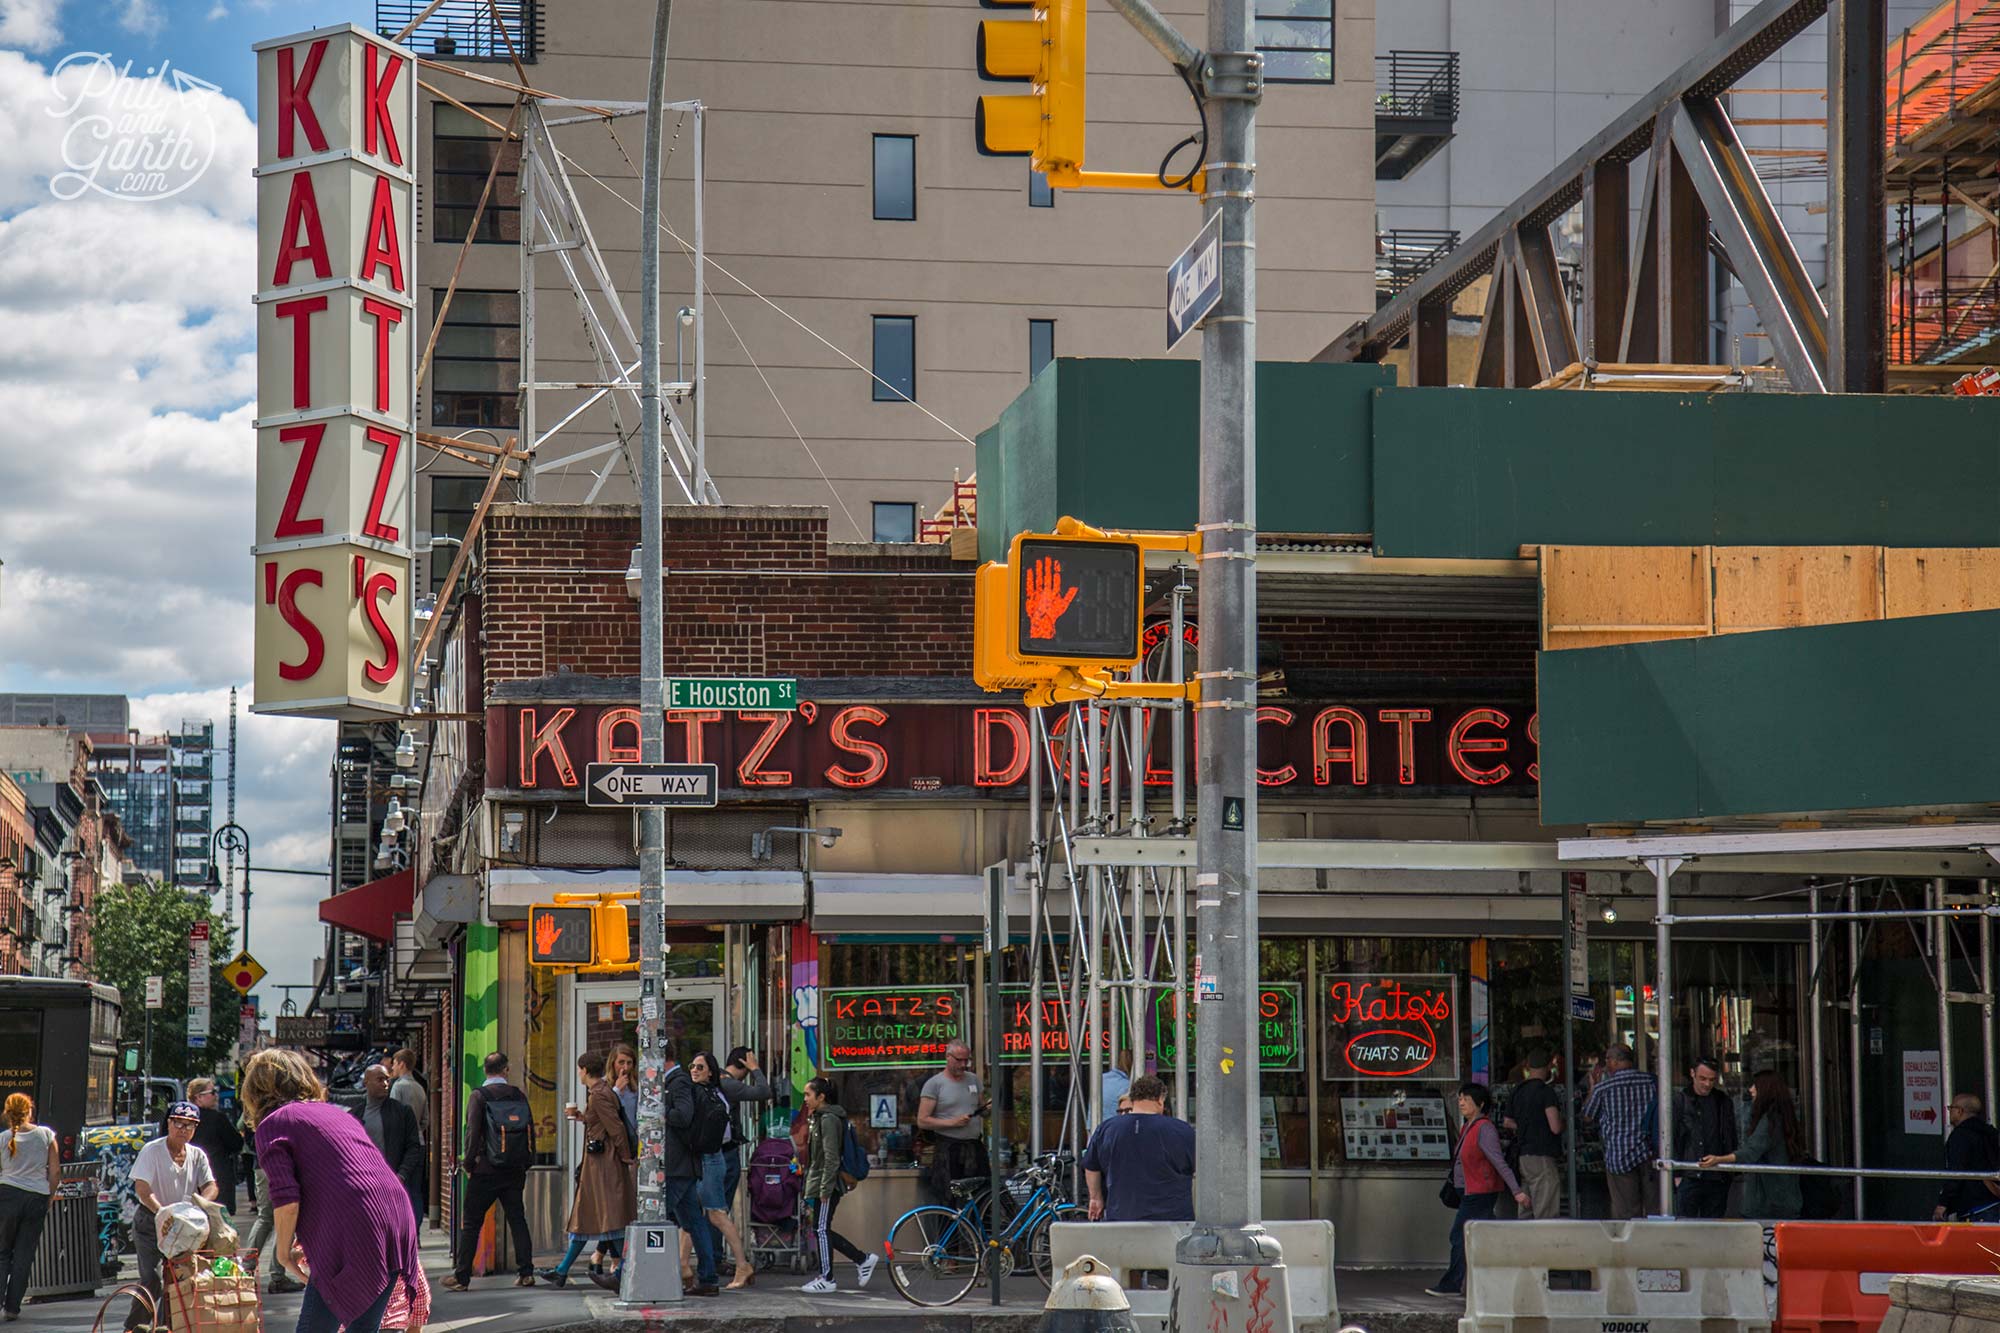 Katz's Delicatessen located in the Lower East Side since 1888